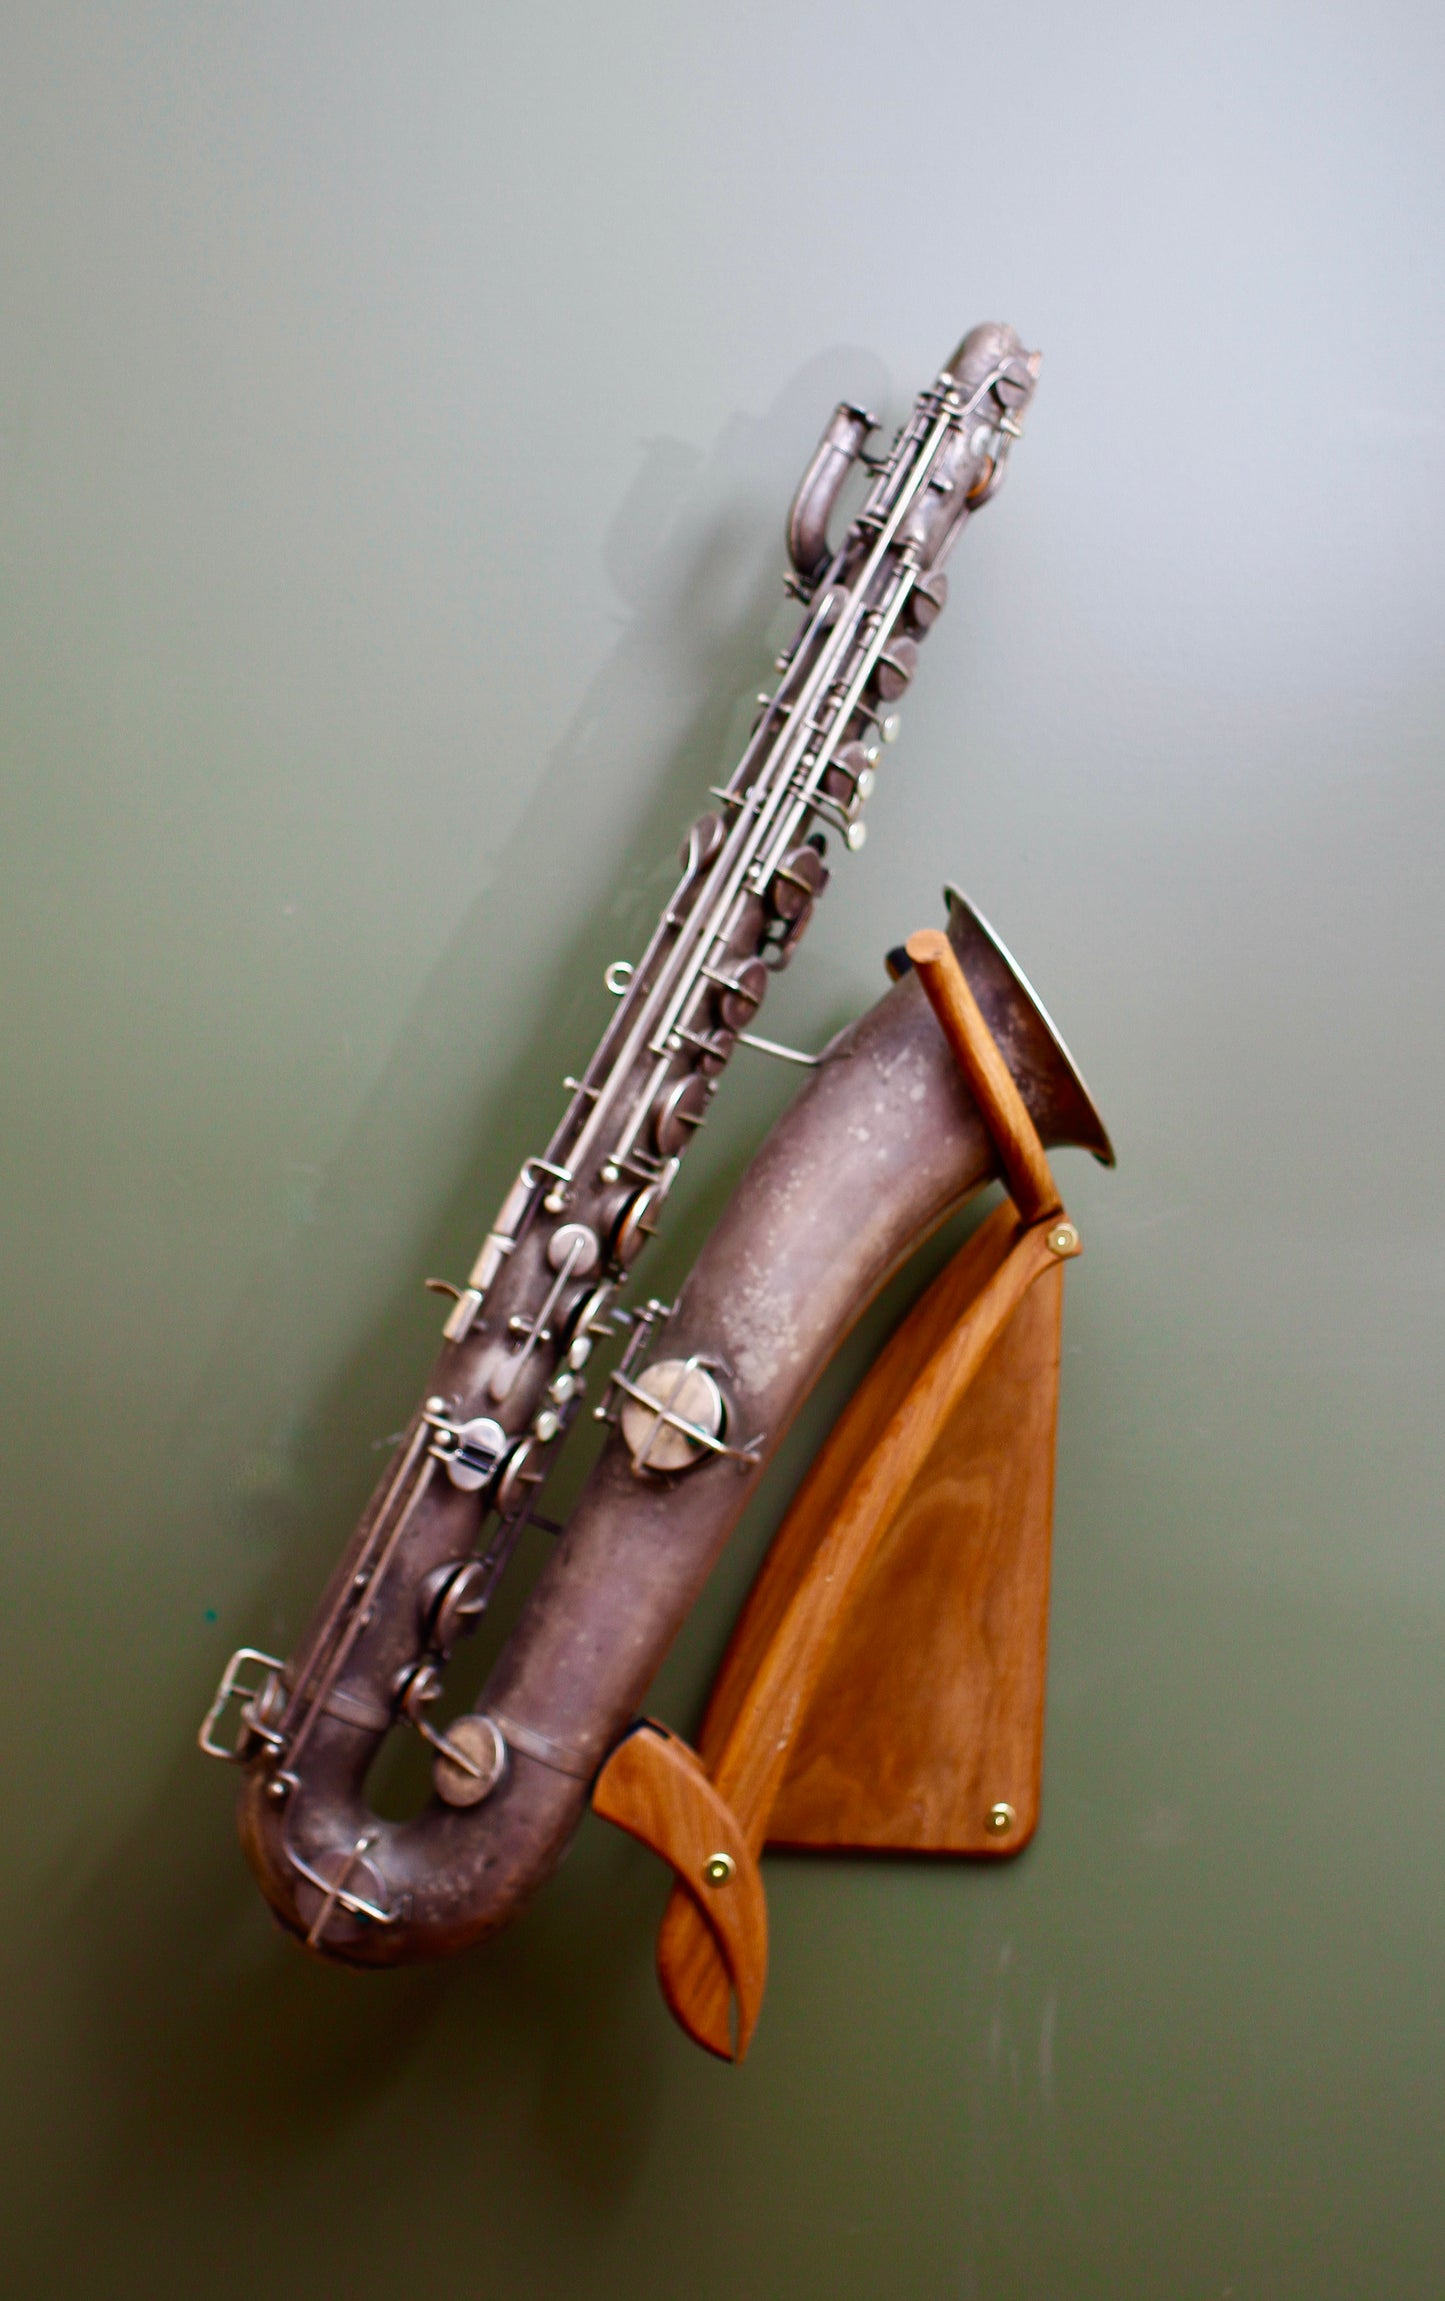 The Wall Hanger - Saxophone Wall Stand